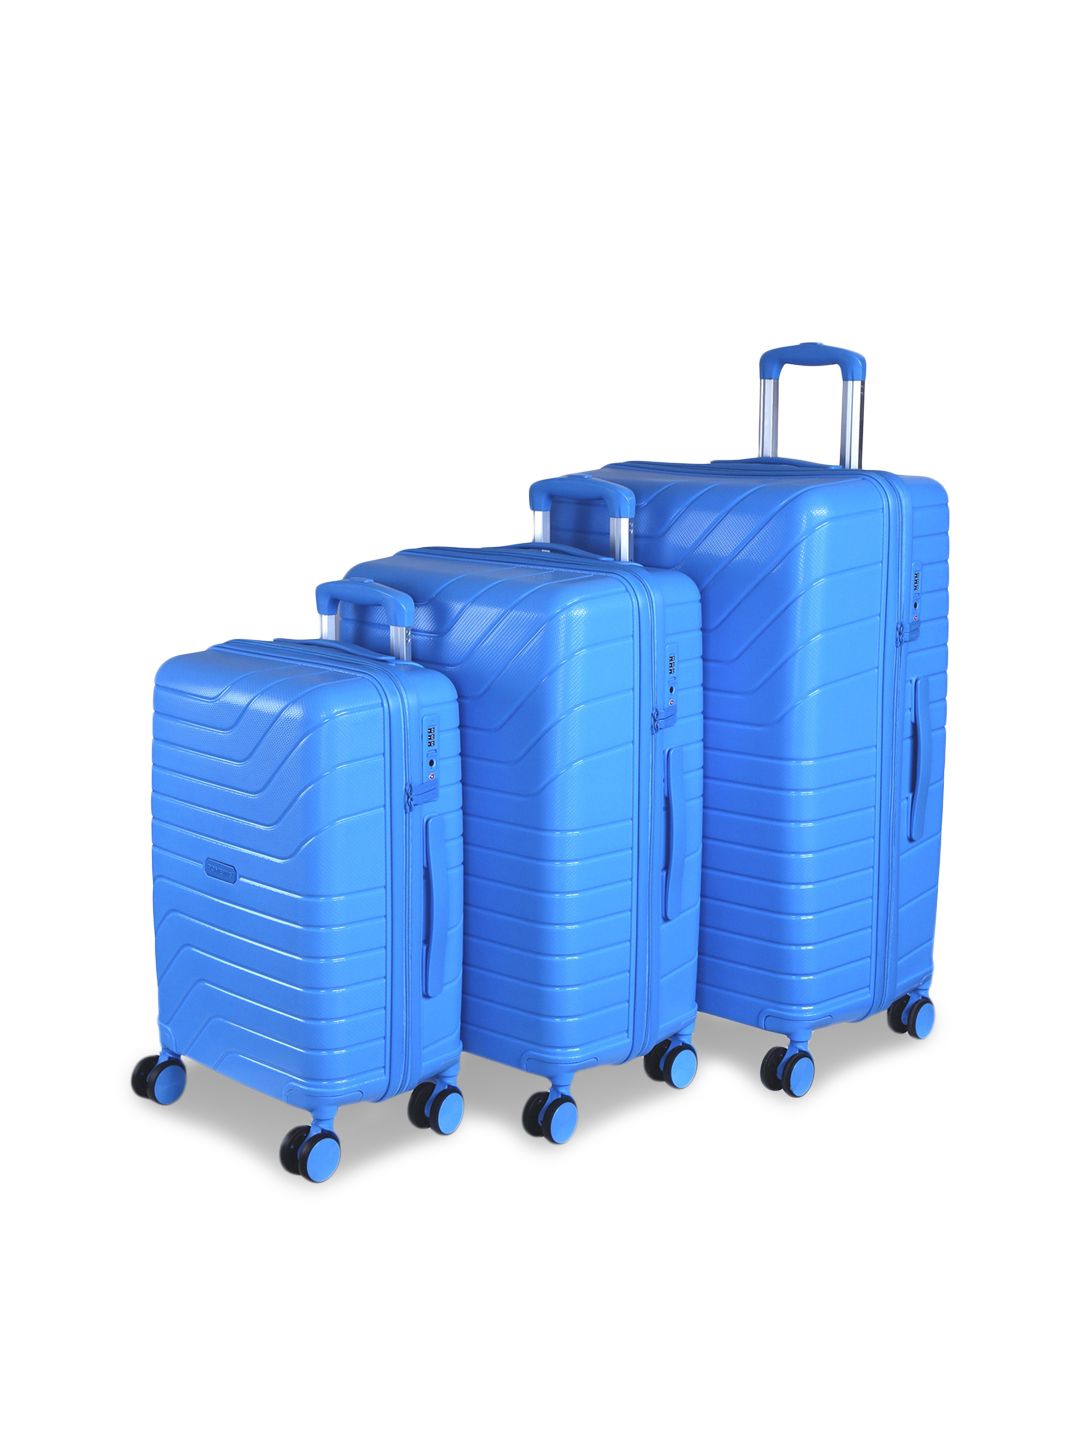 ROMEING Tuscany Set Of 3 Sky Blue Textured Polypropylene Hard-Sided Trolley Suitcases Price in India